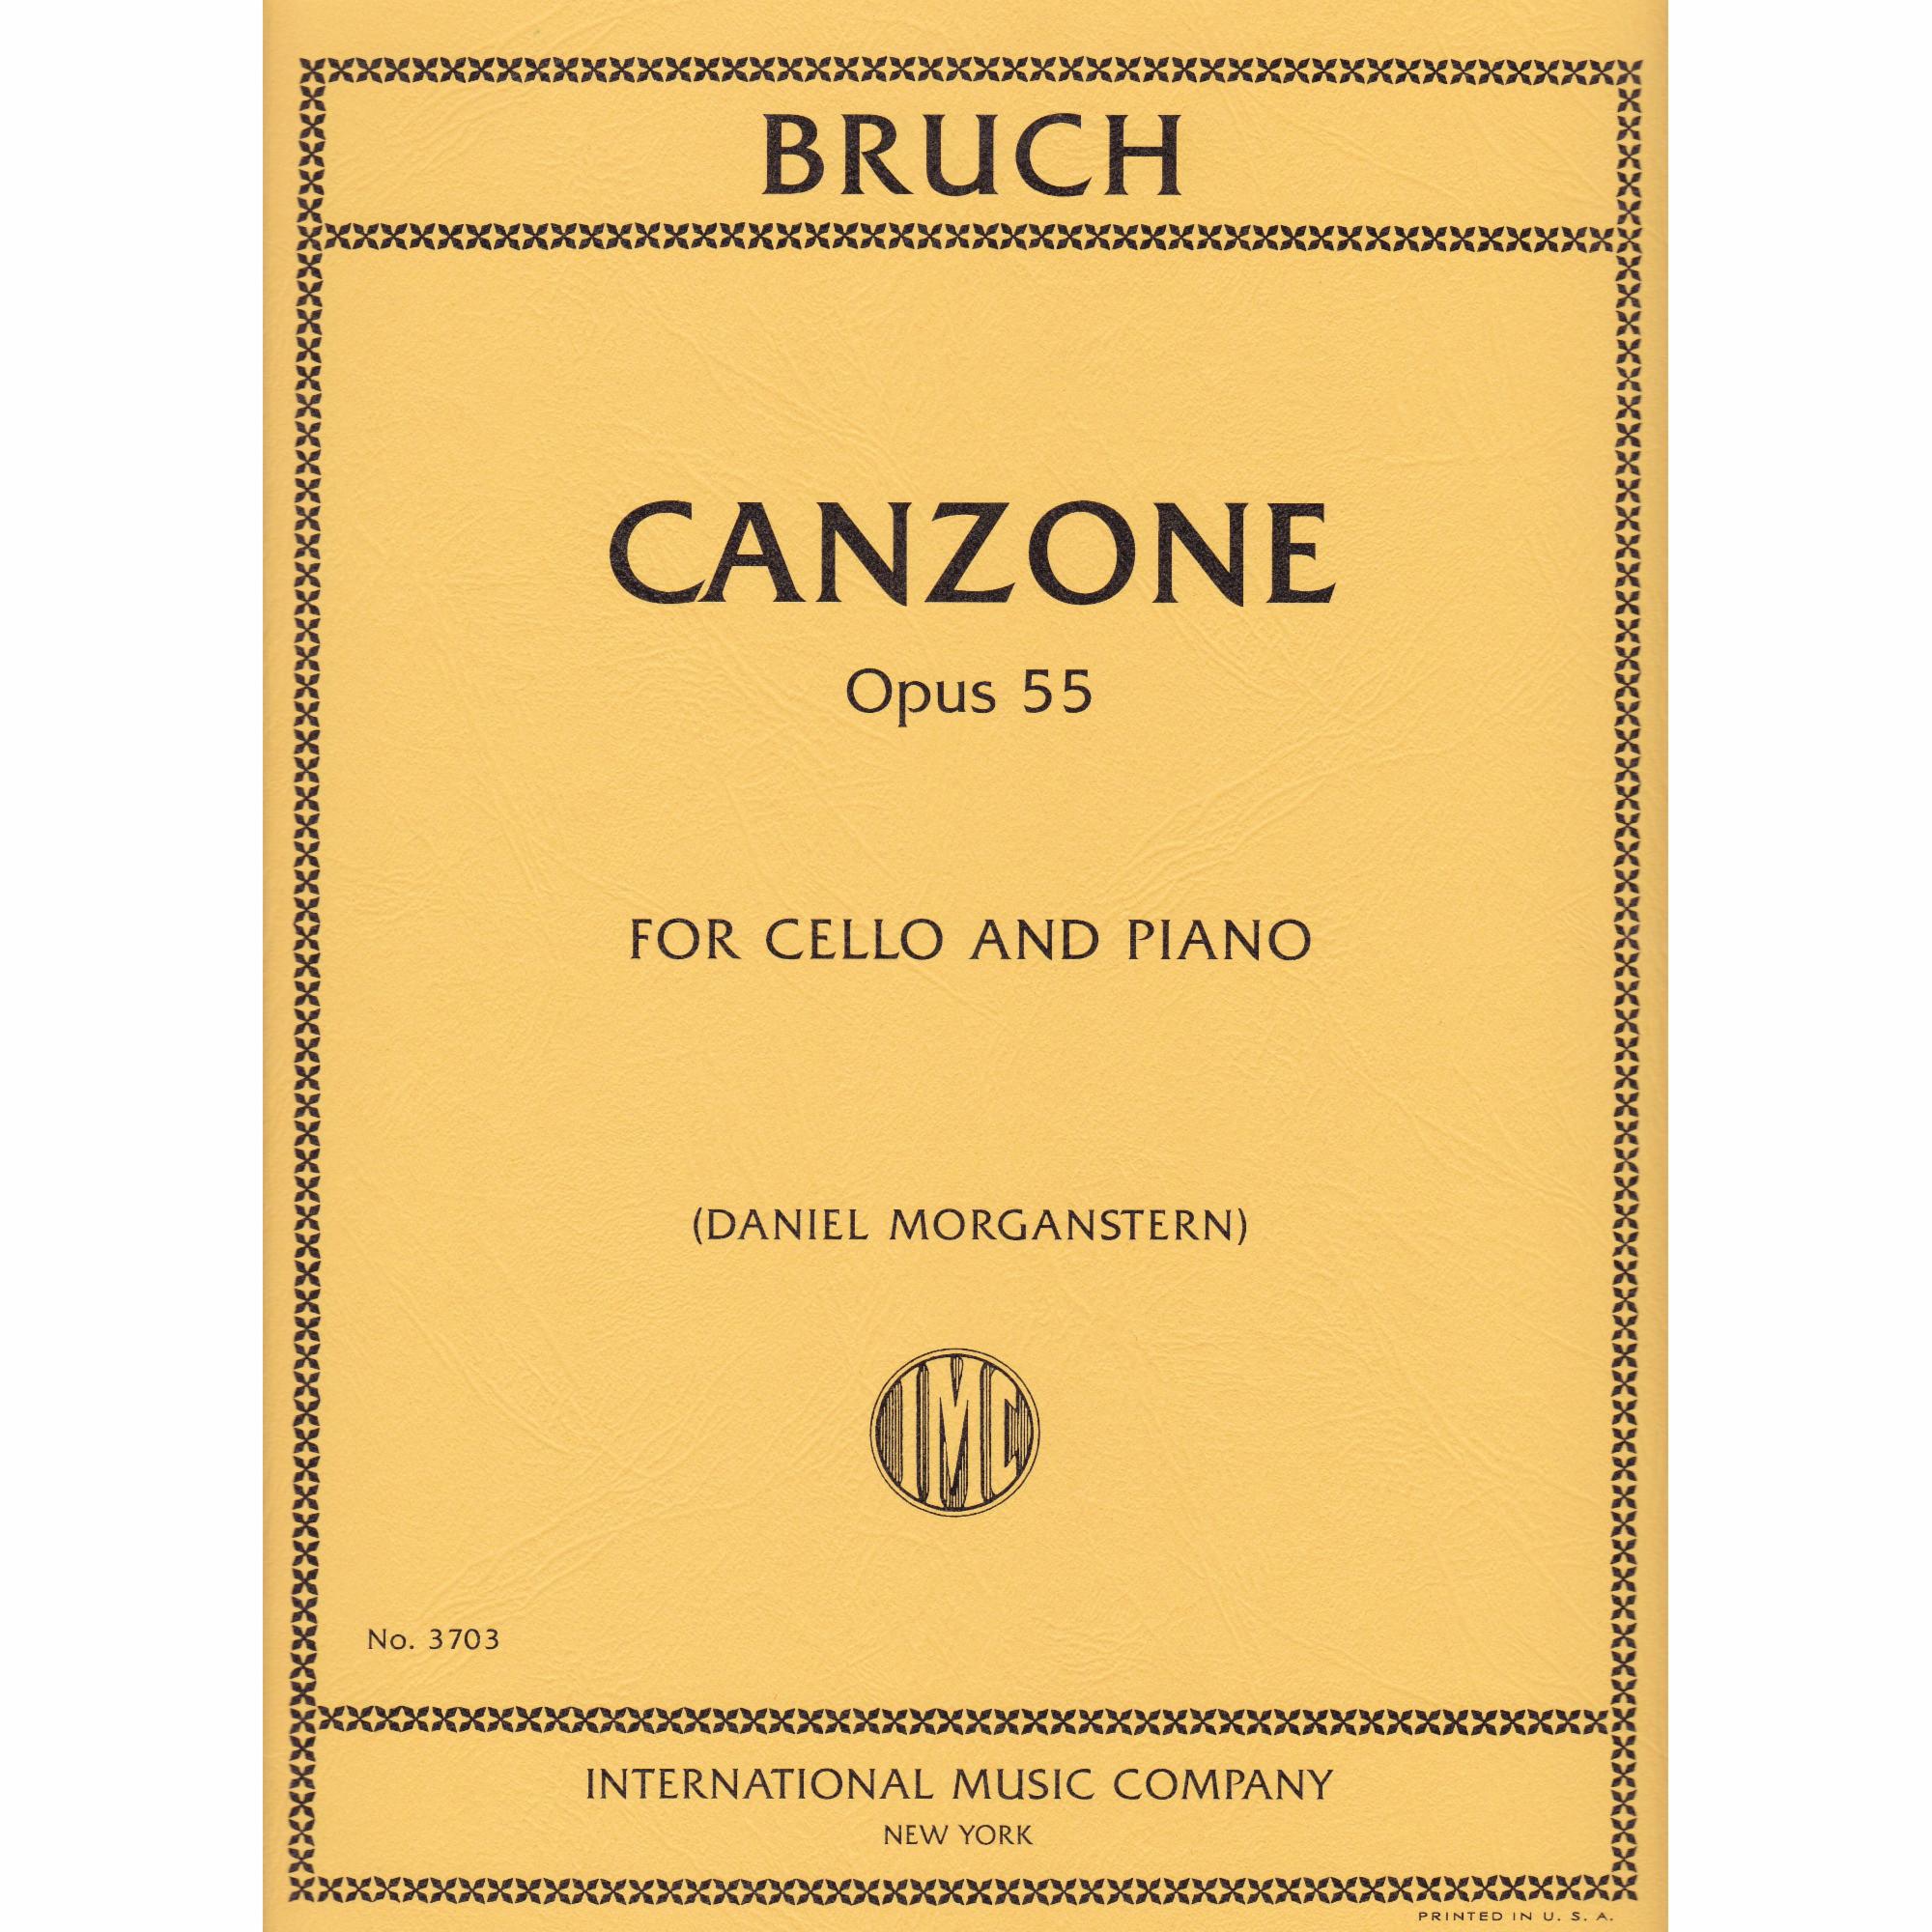 Canzone for Cello and Piano, Op. 55